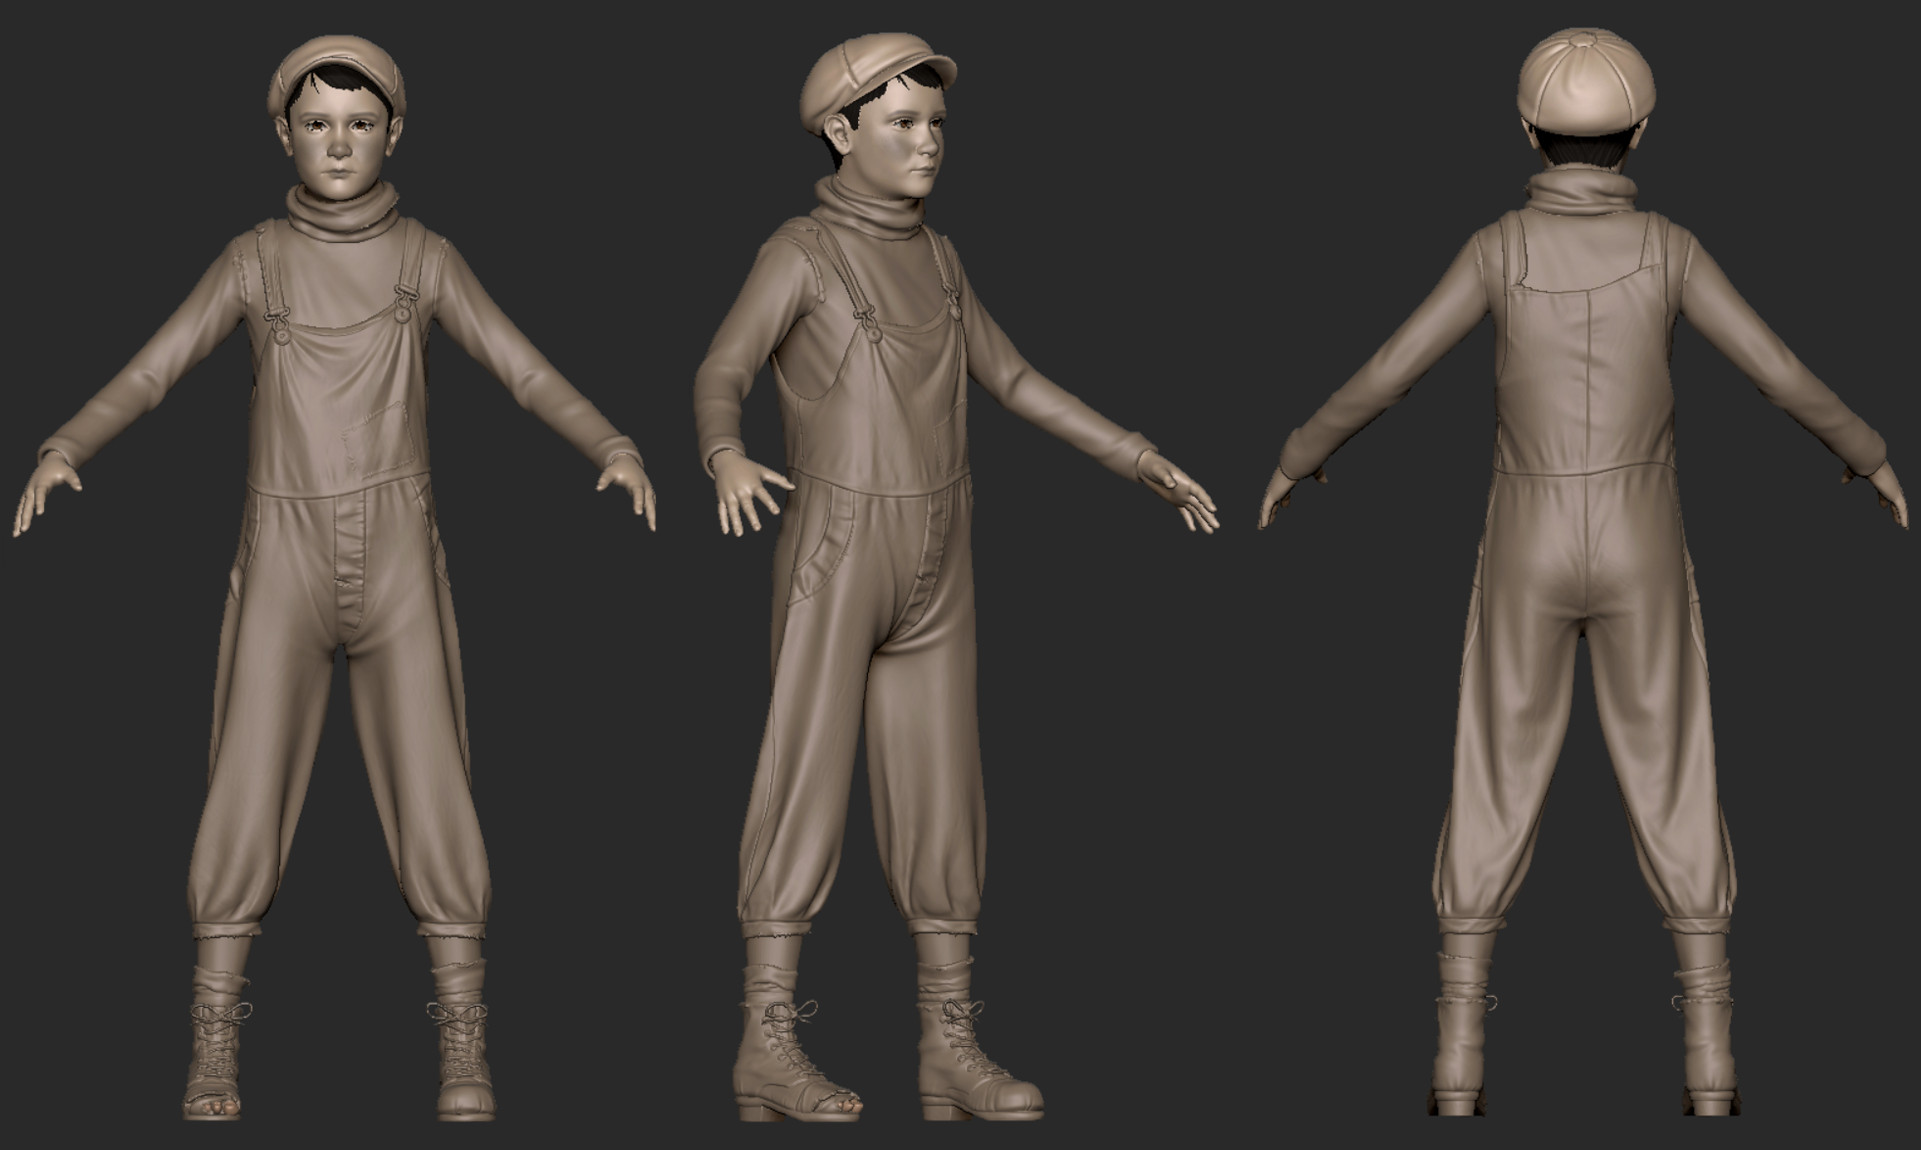 Delve Children Ghosts
Responsible for concepting and hi-poly sculpting.